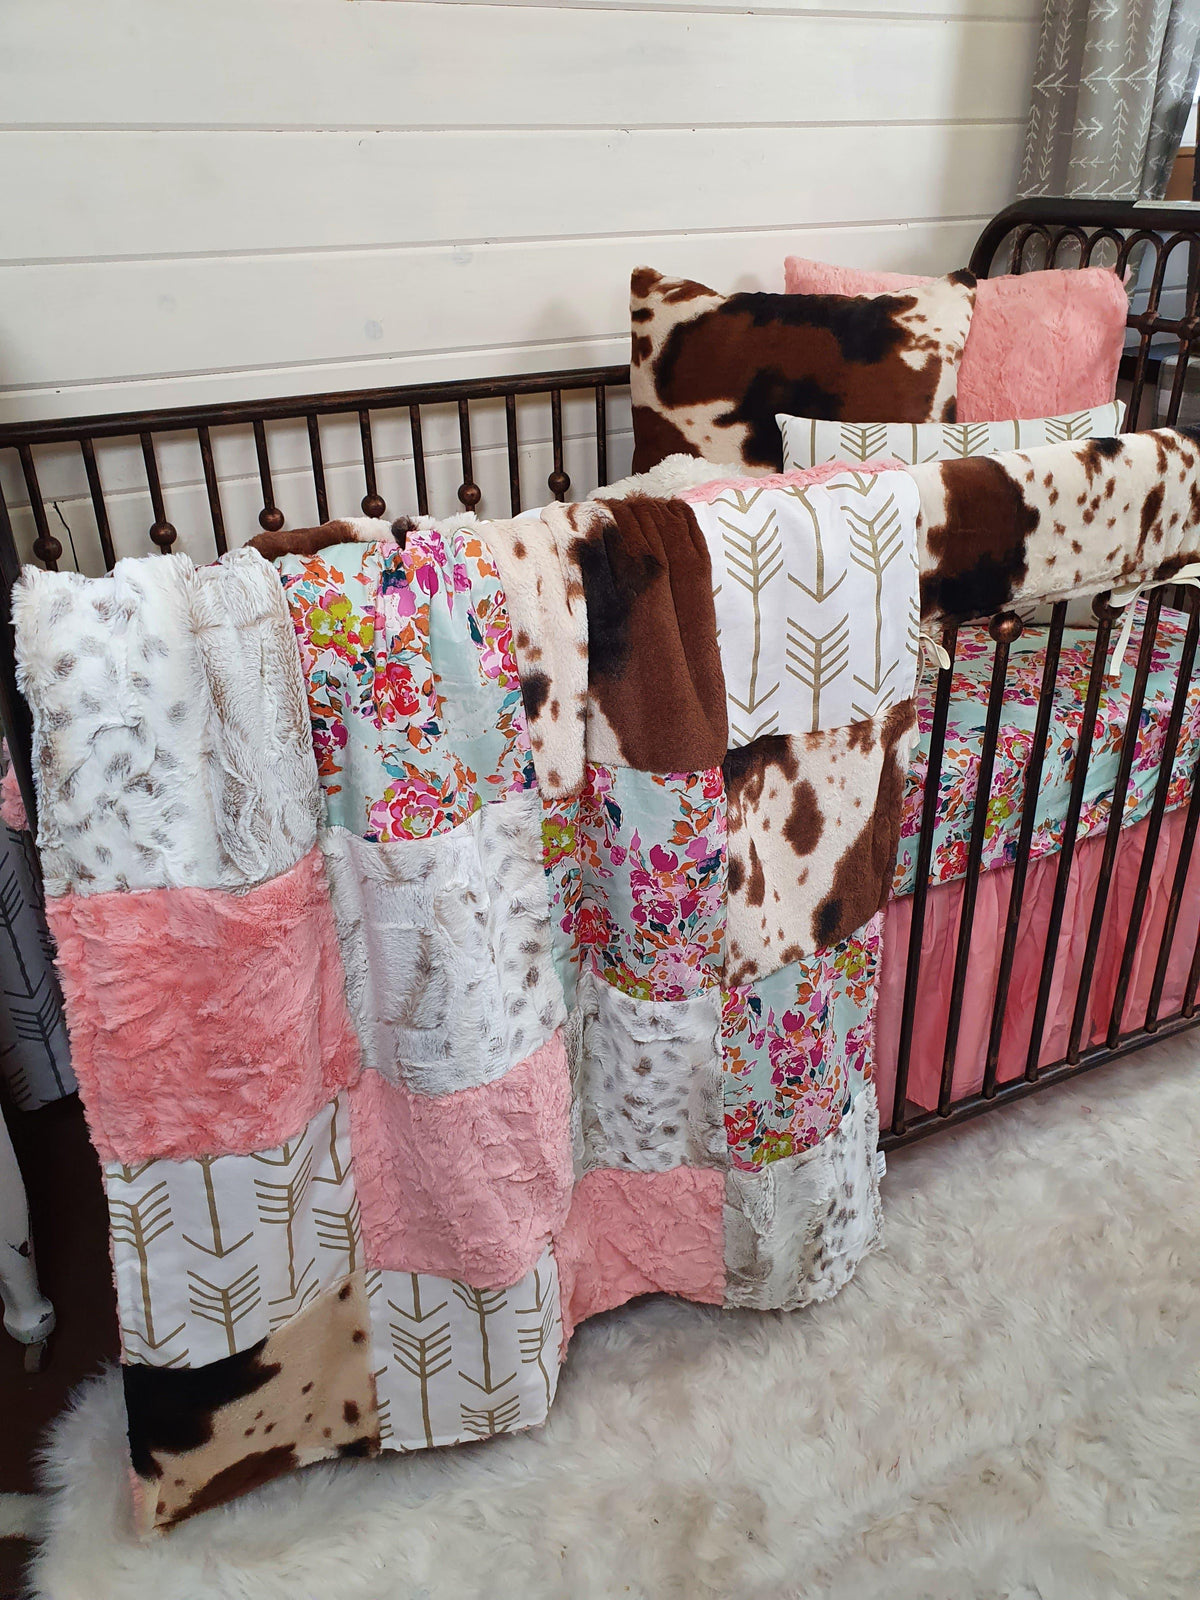 Girl Crib Bedding - Summer Floral and Cow Minky Ranch Collection - DBC Baby Bedding Co 